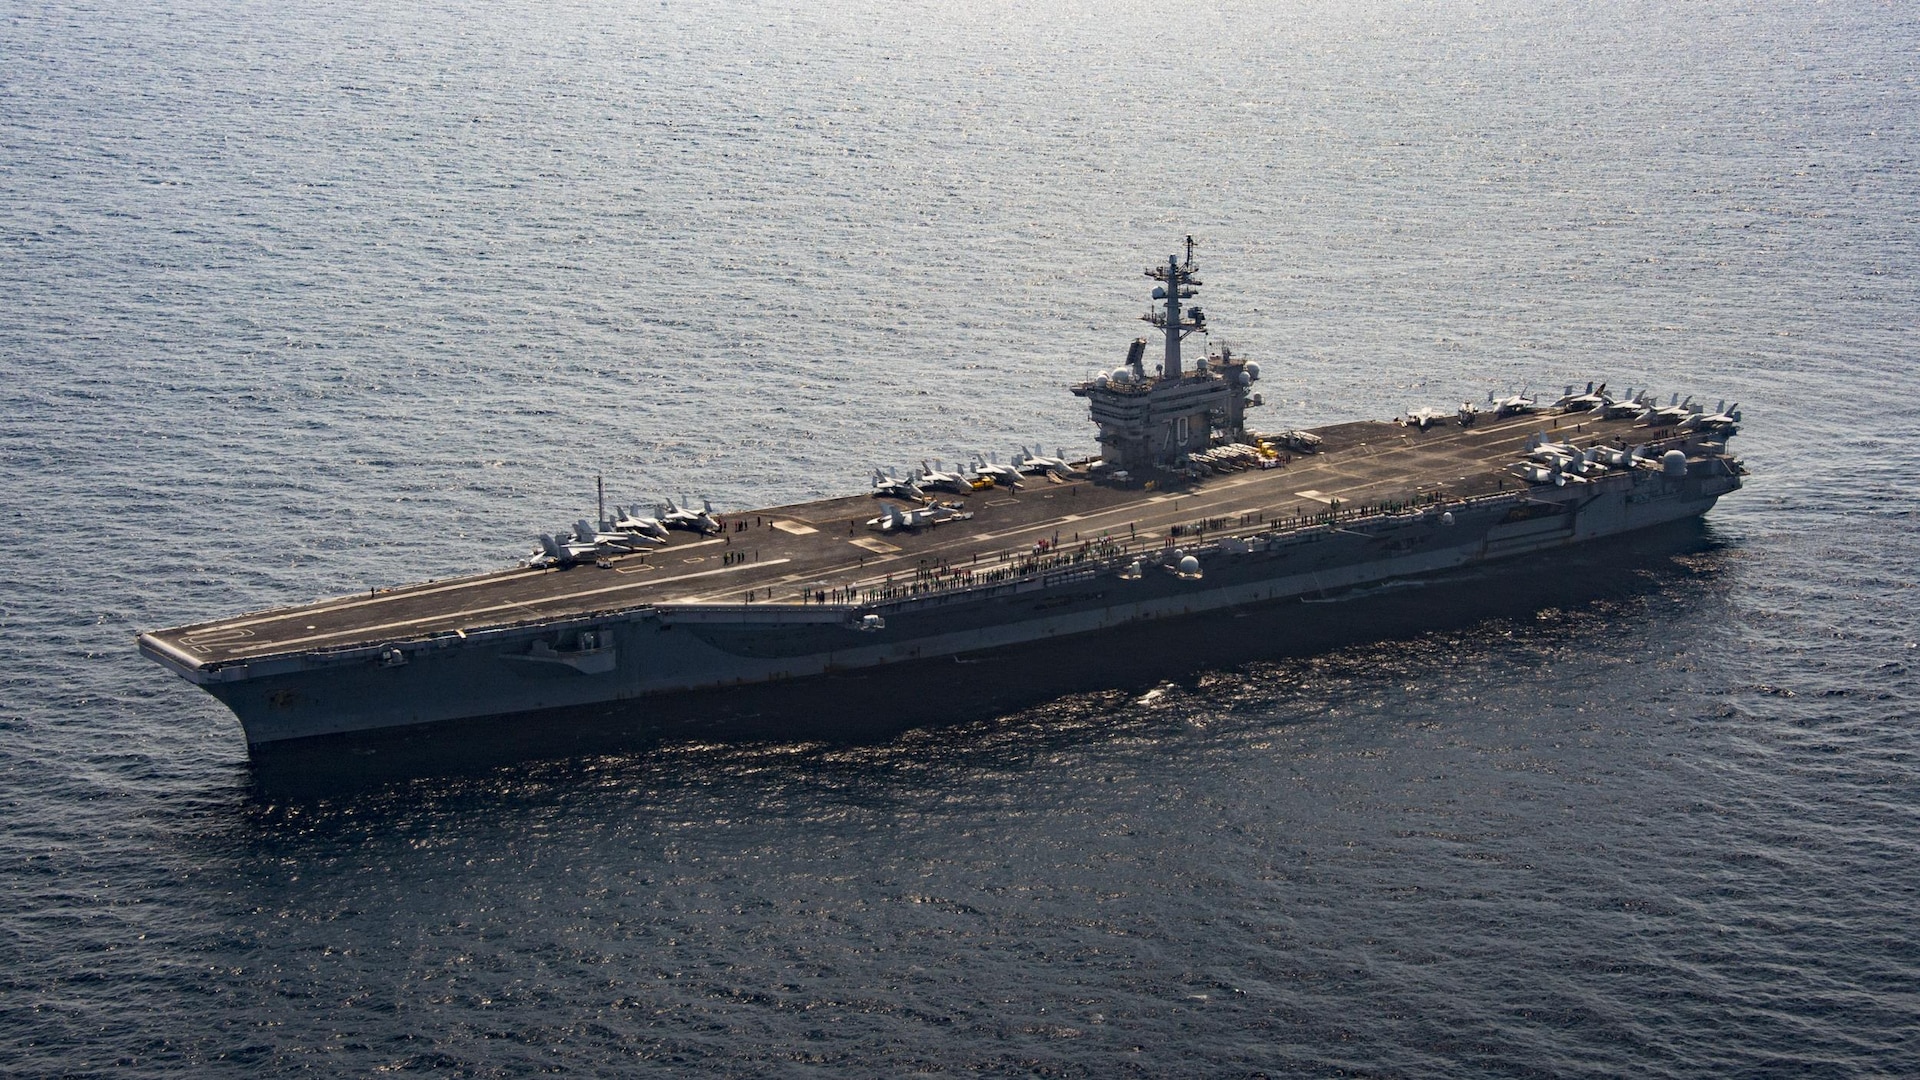 The aircraft carrier USS Carl Vinson (CVN 70) transits the South China Sea, Mar. 6, 2017. The Carl Vinson Carrier Strike Group is on a regularly scheduled Western Pacific deployment as part of the U.S. Pacific Fleet-led initiative to extend the command and control functions of U.S. 3rd Fleet. U.S Navy aircraft carrier strike groups have patrolled the Indo-Asia-Pacific regularly and routinely for more than 70 years. 